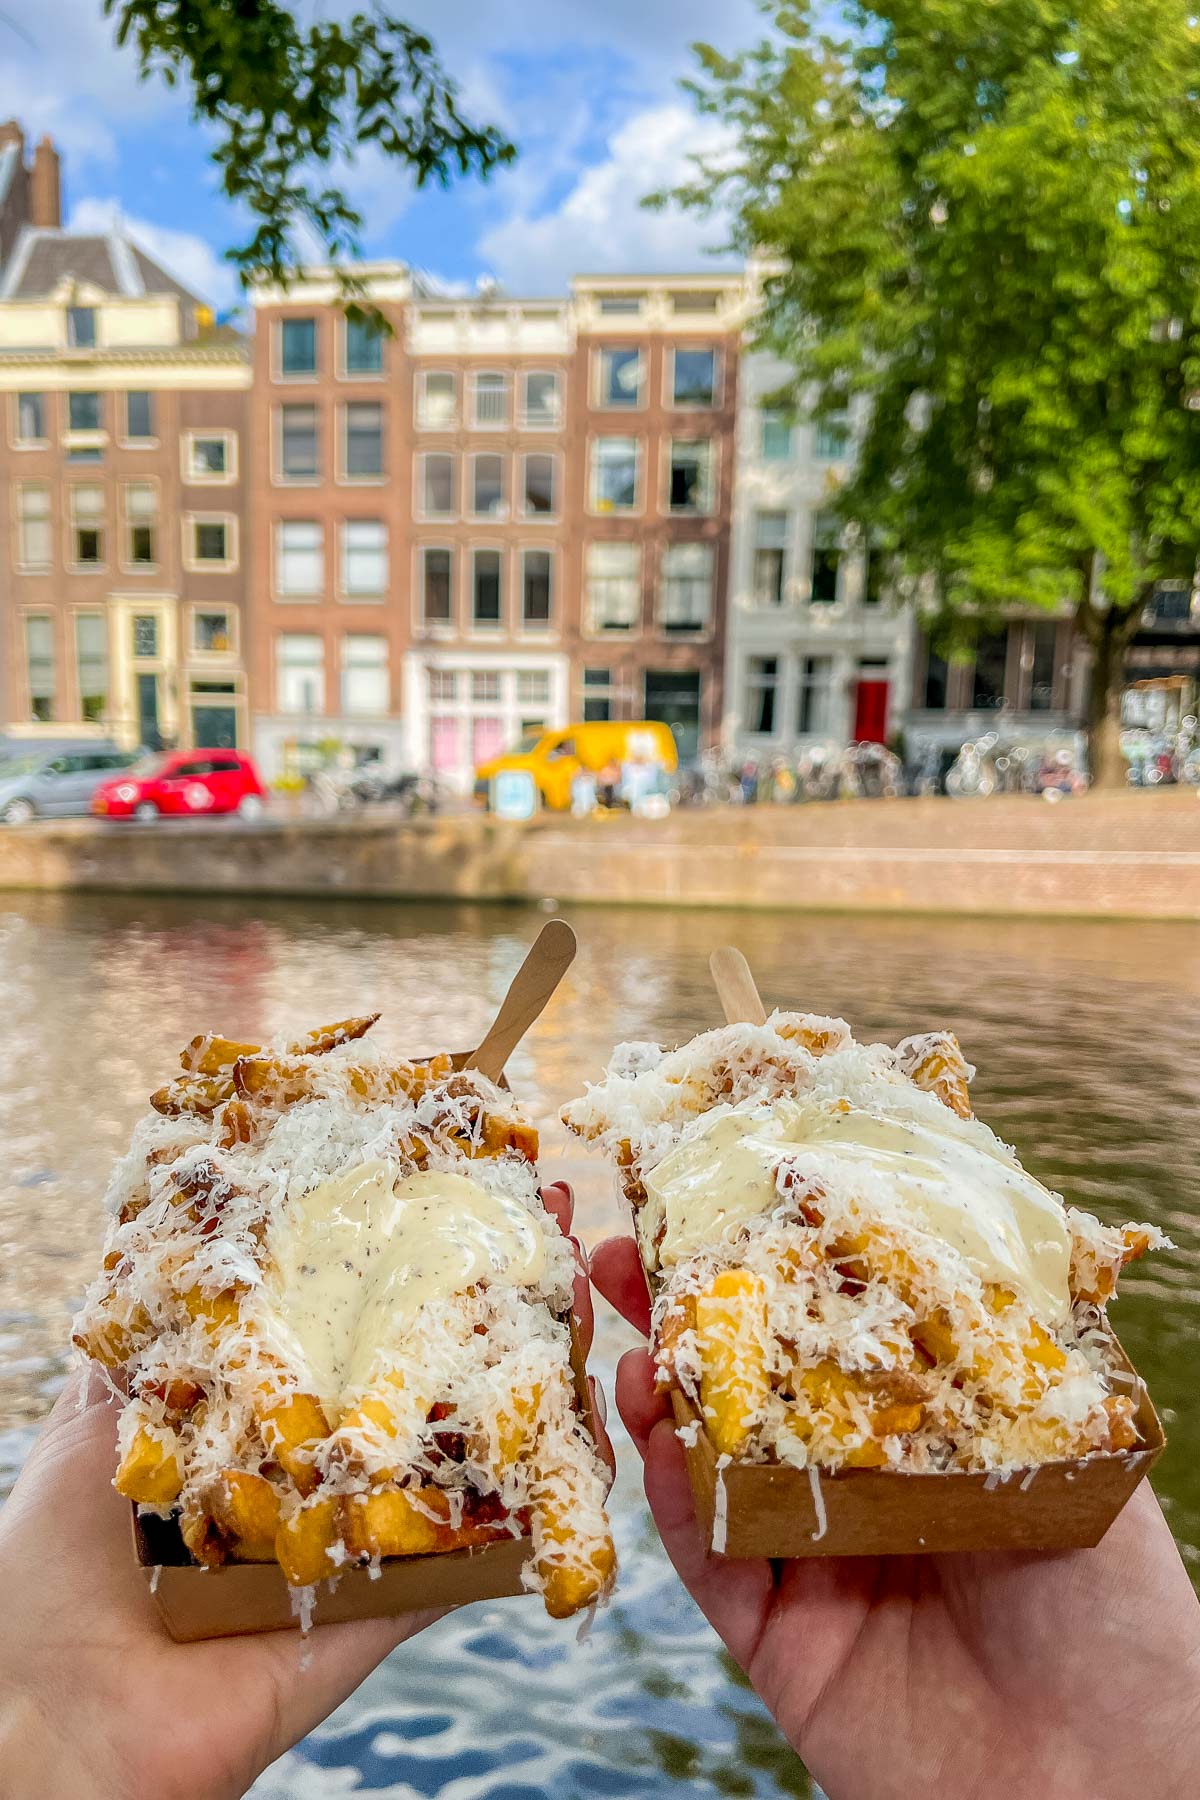 Fries from Fabel Friet Amsterdam